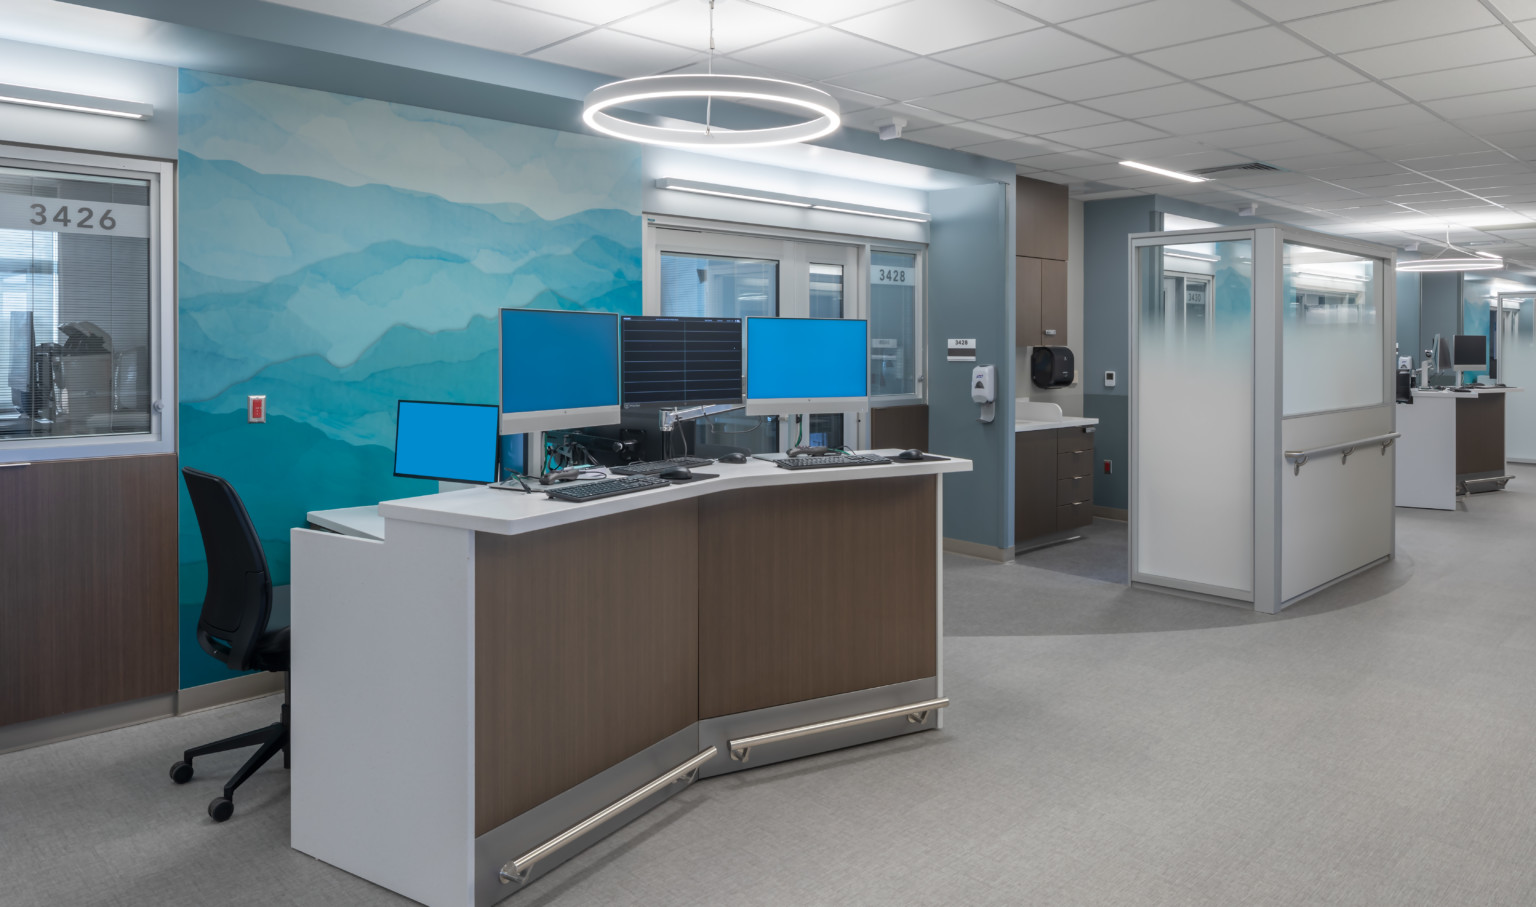 Hospital corridor with angled desk with multiple monitors in front of abstract blue and green mural. Glass partitions beyond